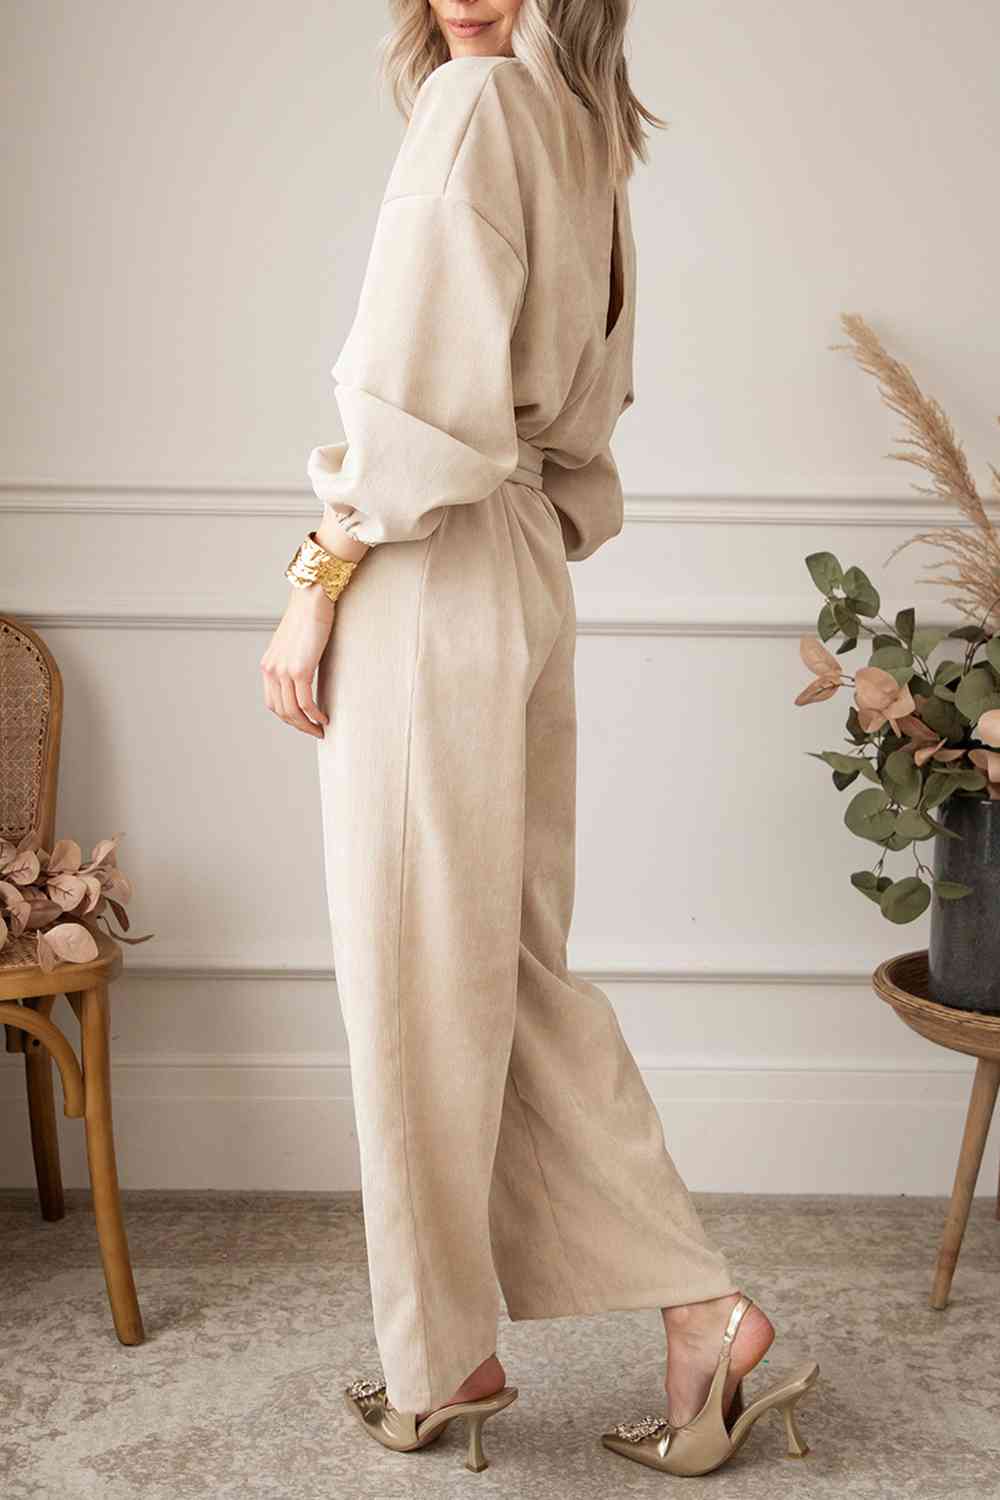 This jumpsuit features a tie waist, trendy v-neck, and wide leg design, making it a must-have trend from Trendsi Trends.